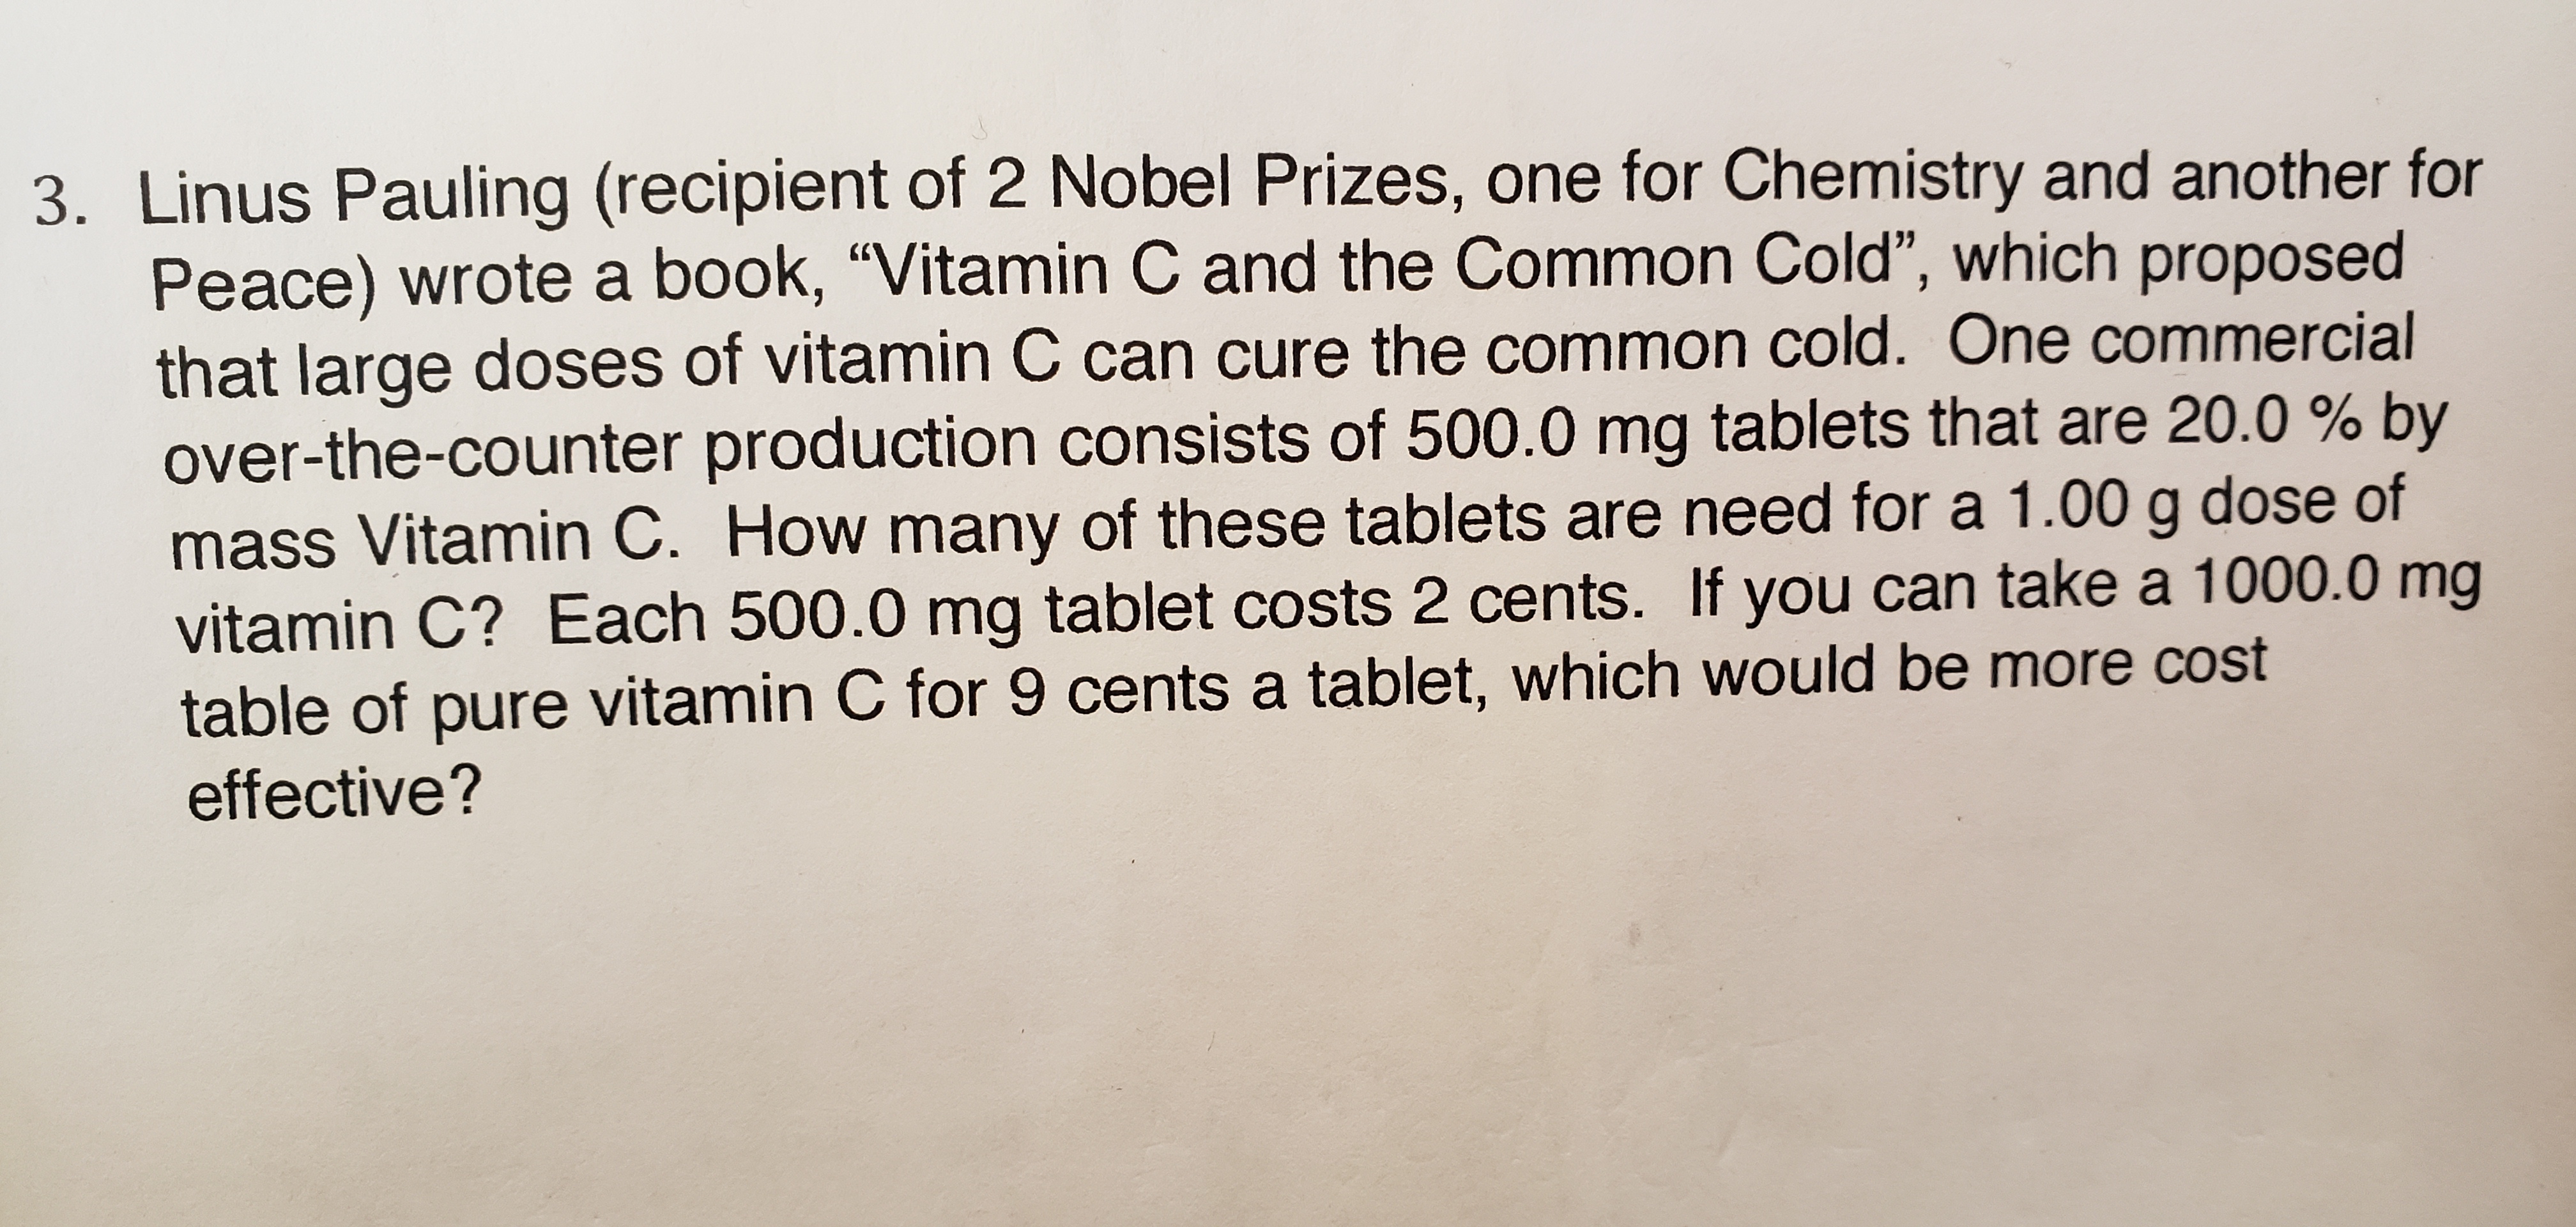 3. Linus Pauling (recipient of 2 Nobel Prizes, one for Chemistry and another for
Peace) wrote a book, "Vitamin C and the Common Cold", which proposed
that large doses of vitamin C can cure the common cold. One commercial
over-the-counter production consists of 500.0 mg tablets that are 20.0 % by
mass Vitamin C. How many of these tablets are need for a 1.00 g dose of
vitamin C? Each 500.0 mg tablet costs 2 cents. If you can take a 1000.0 mg
table of pure vitamin C for 9 cents a tablet, which would be more cost
effective?
